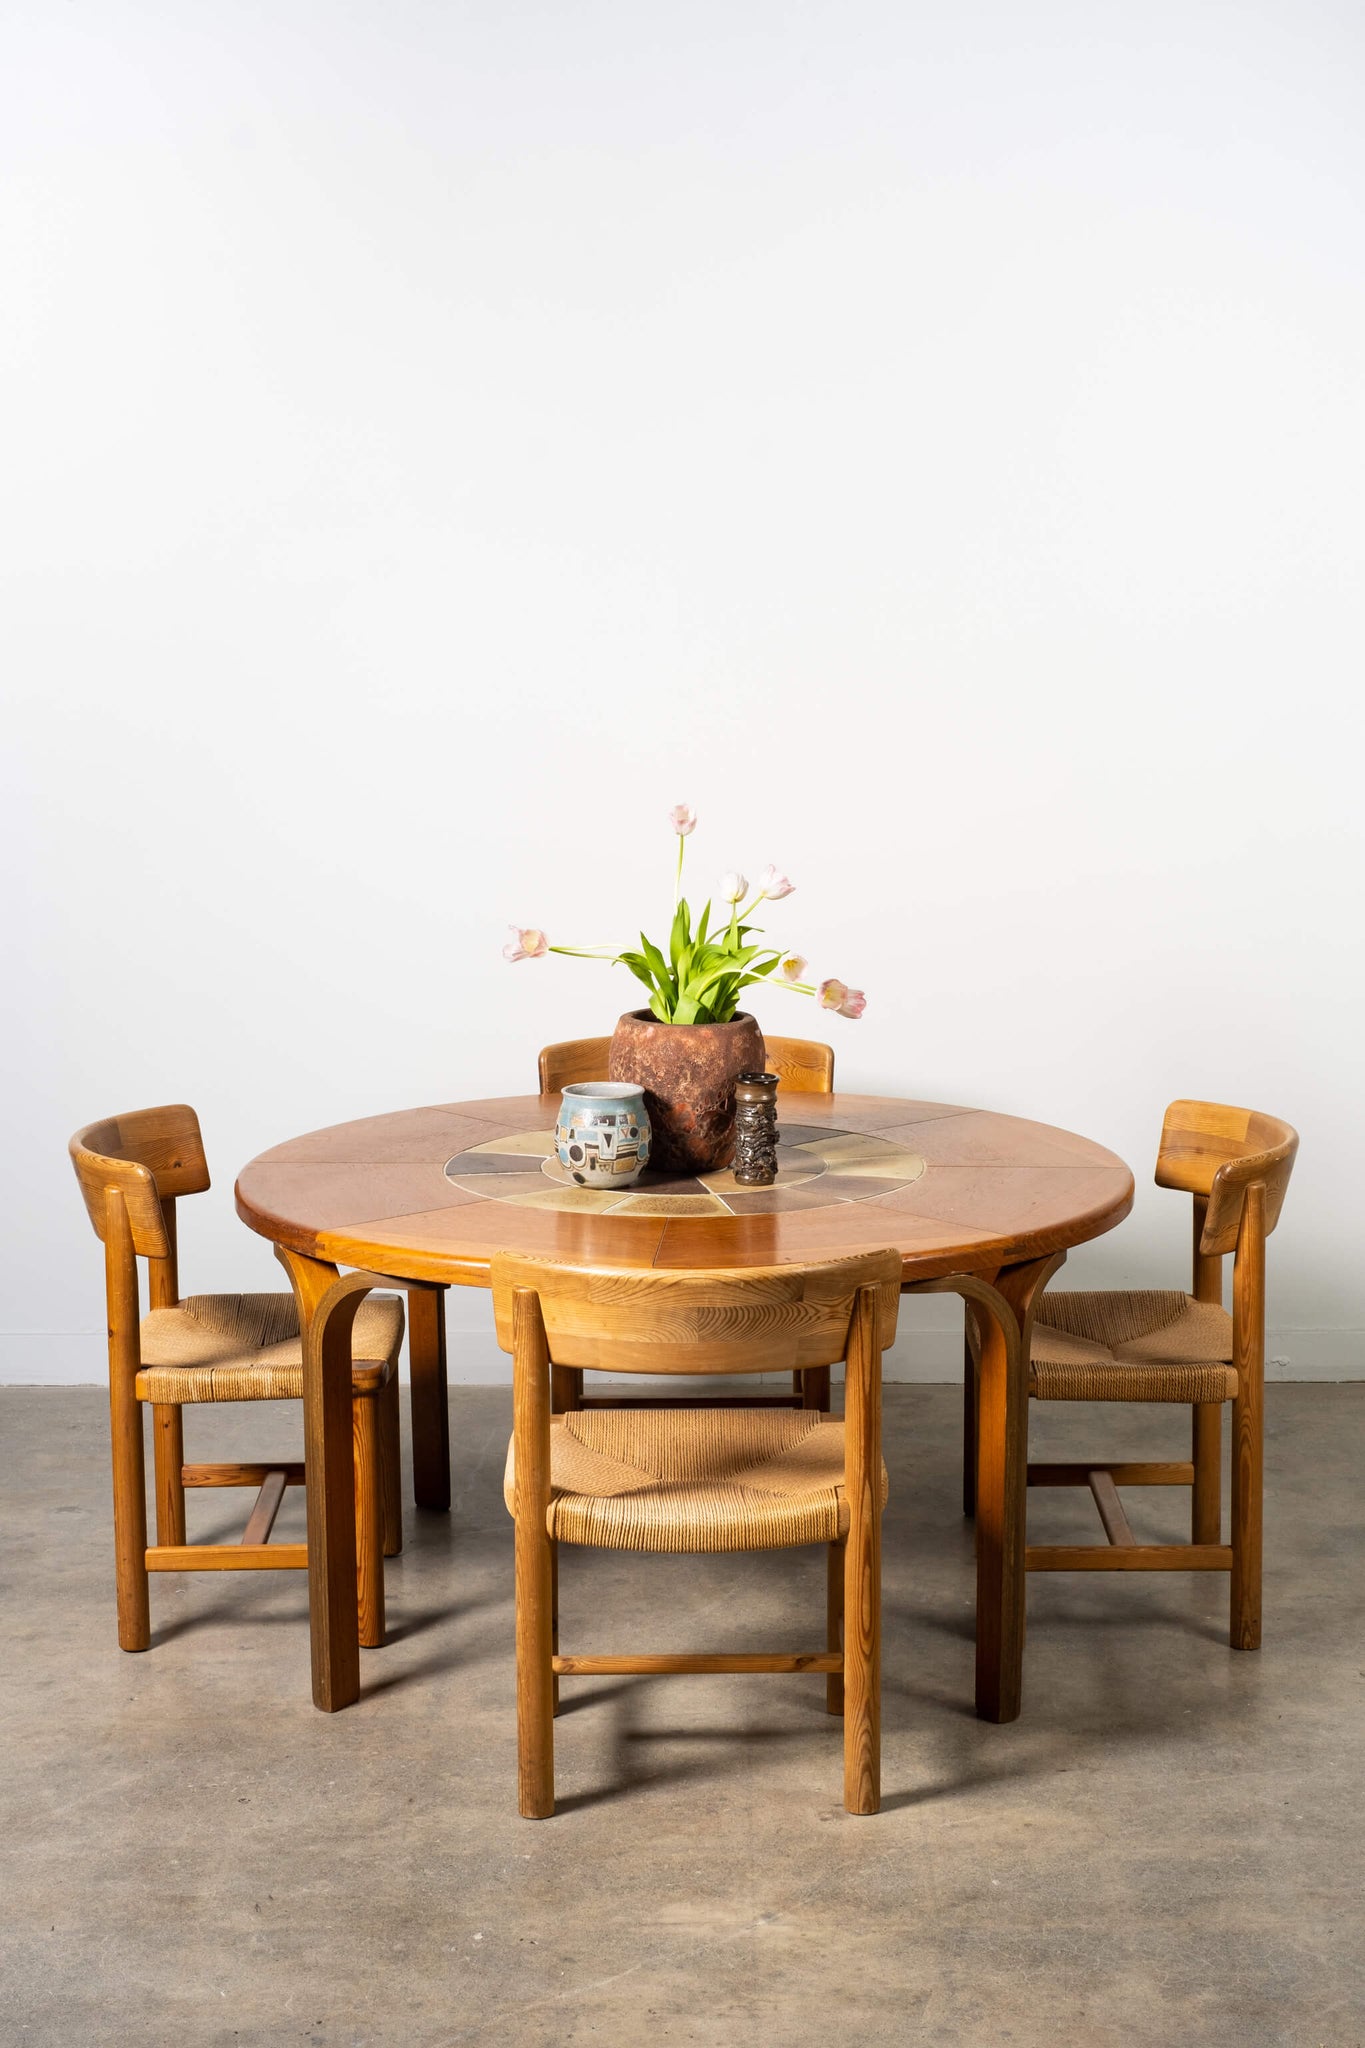 Vintage Round Tiled Top Dining Table Tue Poulsen Haslev, shown with 4 chairs